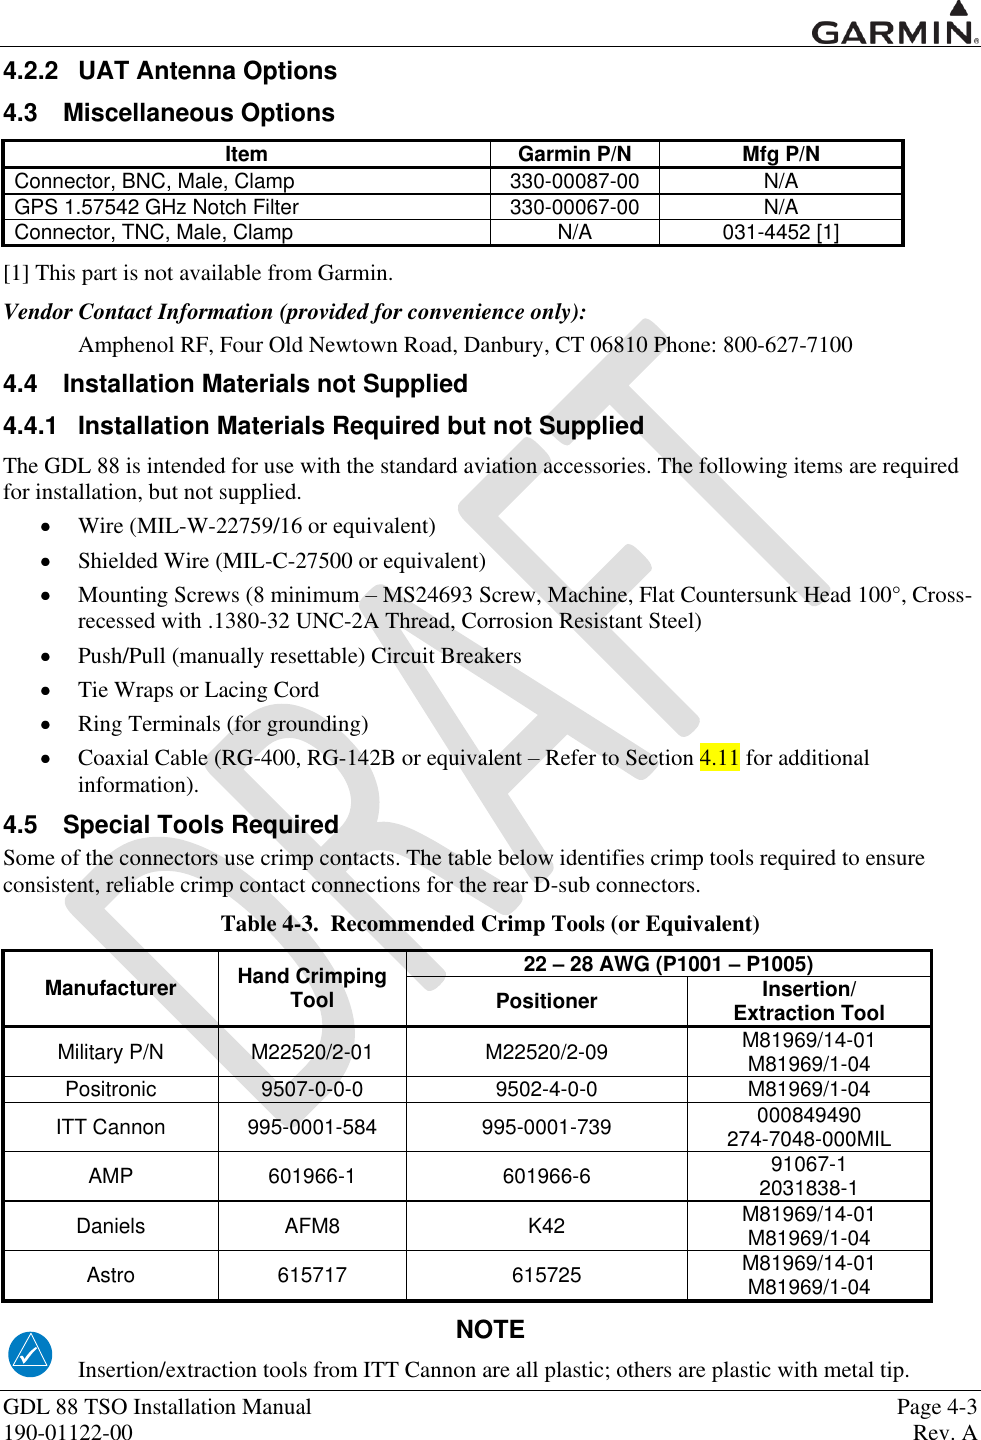  GDL 88 TSO Installation Manual    Page 4-3 190-01122-00  Rev. A  4.2.2  UAT Antenna Options 4.3  Miscellaneous Options Item Garmin P/N Mfg P/N Connector, BNC, Male, Clamp 330-00087-00 N/A GPS 1.57542 GHz Notch Filter 330-00067-00 N/A Connector, TNC, Male, Clamp N/A 031-4452 [1] [1] This part is not available from Garmin.  Vendor Contact Information (provided for convenience only): Amphenol RF, Four Old Newtown Road, Danbury, CT 06810 Phone: 800-627-7100 4.4  Installation Materials not Supplied 4.4.1  Installation Materials Required but not Supplied The GDL 88 is intended for use with the standard aviation accessories. The following items are required for installation, but not supplied.  Wire (MIL-W-22759/16 or equivalent)  Shielded Wire (MIL-C-27500 or equivalent)  Mounting Screws (8 minimum – MS24693 Screw, Machine, Flat Countersunk Head 100°, Cross-recessed with .1380-32 UNC-2A Thread, Corrosion Resistant Steel)  Push/Pull (manually resettable) Circuit Breakers   Tie Wraps or Lacing Cord  Ring Terminals (for grounding)  Coaxial Cable (RG-400, RG-142B or equivalent – Refer to Section 4.11 for additional information). 4.5  Special Tools Required Some of the connectors use crimp contacts. The table below identifies crimp tools required to ensure consistent, reliable crimp contact connections for the rear D-sub connectors. Table 4-3.  Recommended Crimp Tools (or Equivalent) Manufacturer Hand Crimping Tool 22 – 28 AWG (P1001 – P1005) Positioner Insertion/ Extraction Tool Military P/N M22520/2-01 M22520/2-09 M81969/14-01 M81969/1-04 Positronic 9507-0-0-0 9502-4-0-0 M81969/1-04 ITT Cannon 995-0001-584 995-0001-739 000849490 274-7048-000MIL AMP 601966-1 601966-6 91067-1 2031838-1 Daniels AFM8 K42 M81969/14-01 M81969/1-04 Astro 615717 615725 M81969/14-01 M81969/1-04 NOTE Insertion/extraction tools from ITT Cannon are all plastic; others are plastic with metal tip. 